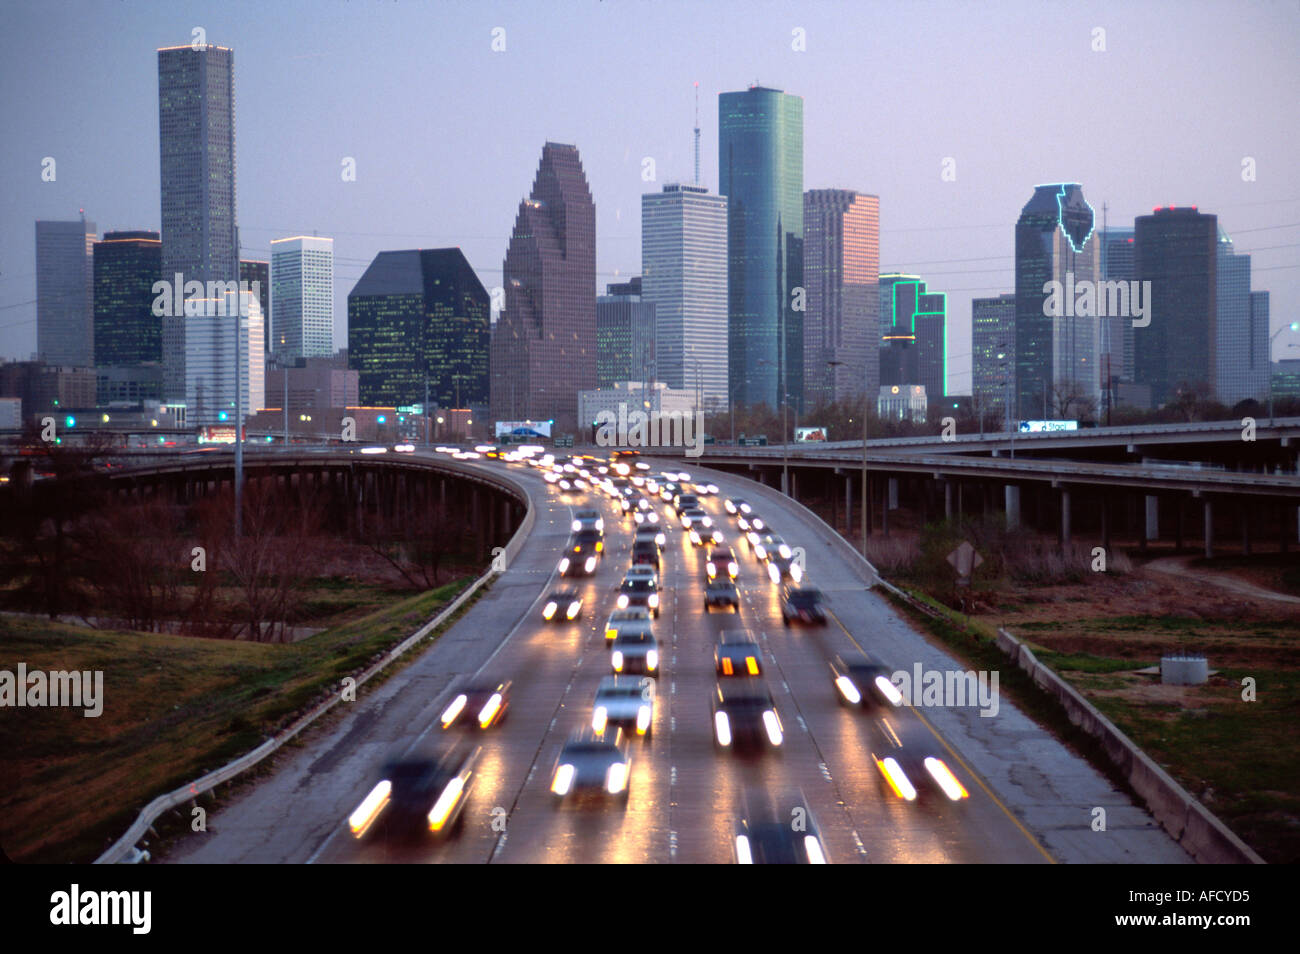 Texas,Lone Star State,The Southwest,Harris County,Houston,Interstate 45,commuter rush hour traffic,transportation,vehicles,city skyline,downtown,city Stock Photo